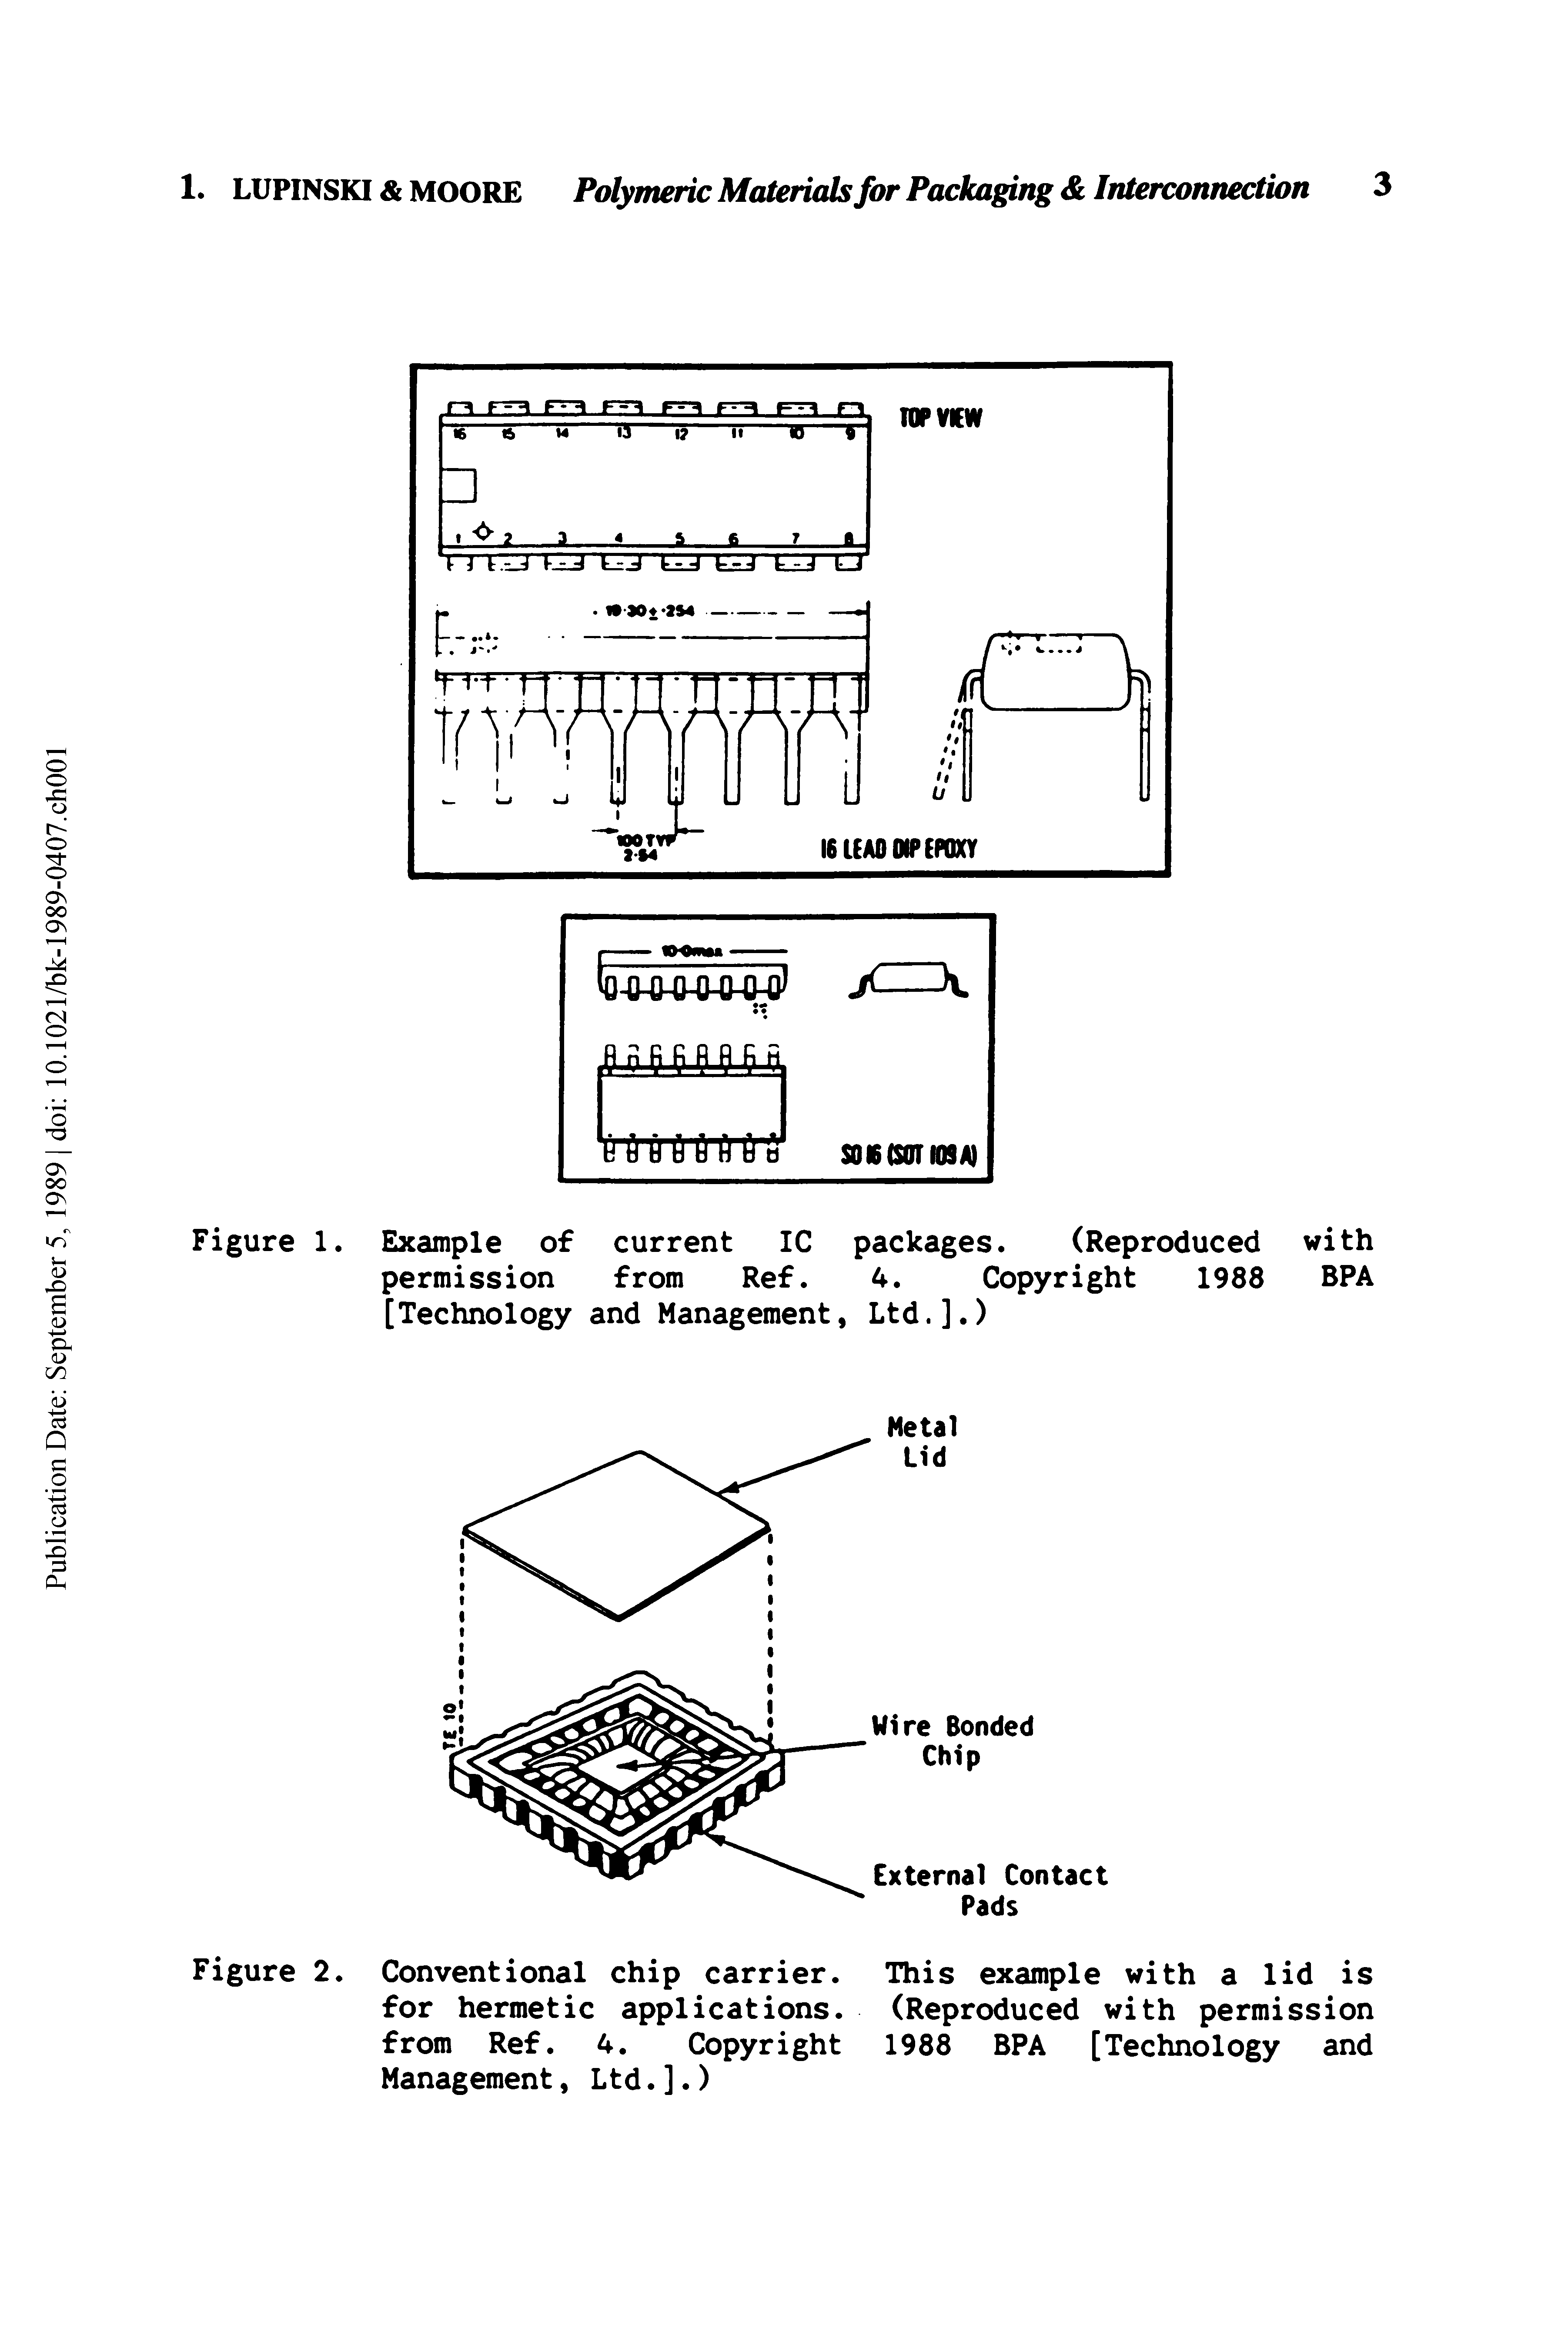 Figure 2. Conventional chip carrier. This example with a lid is for hermetic applications. (Reproduced with permission from Ref. 4. Copyright 1988 BPA [Technology and Management, Ltd.].)...